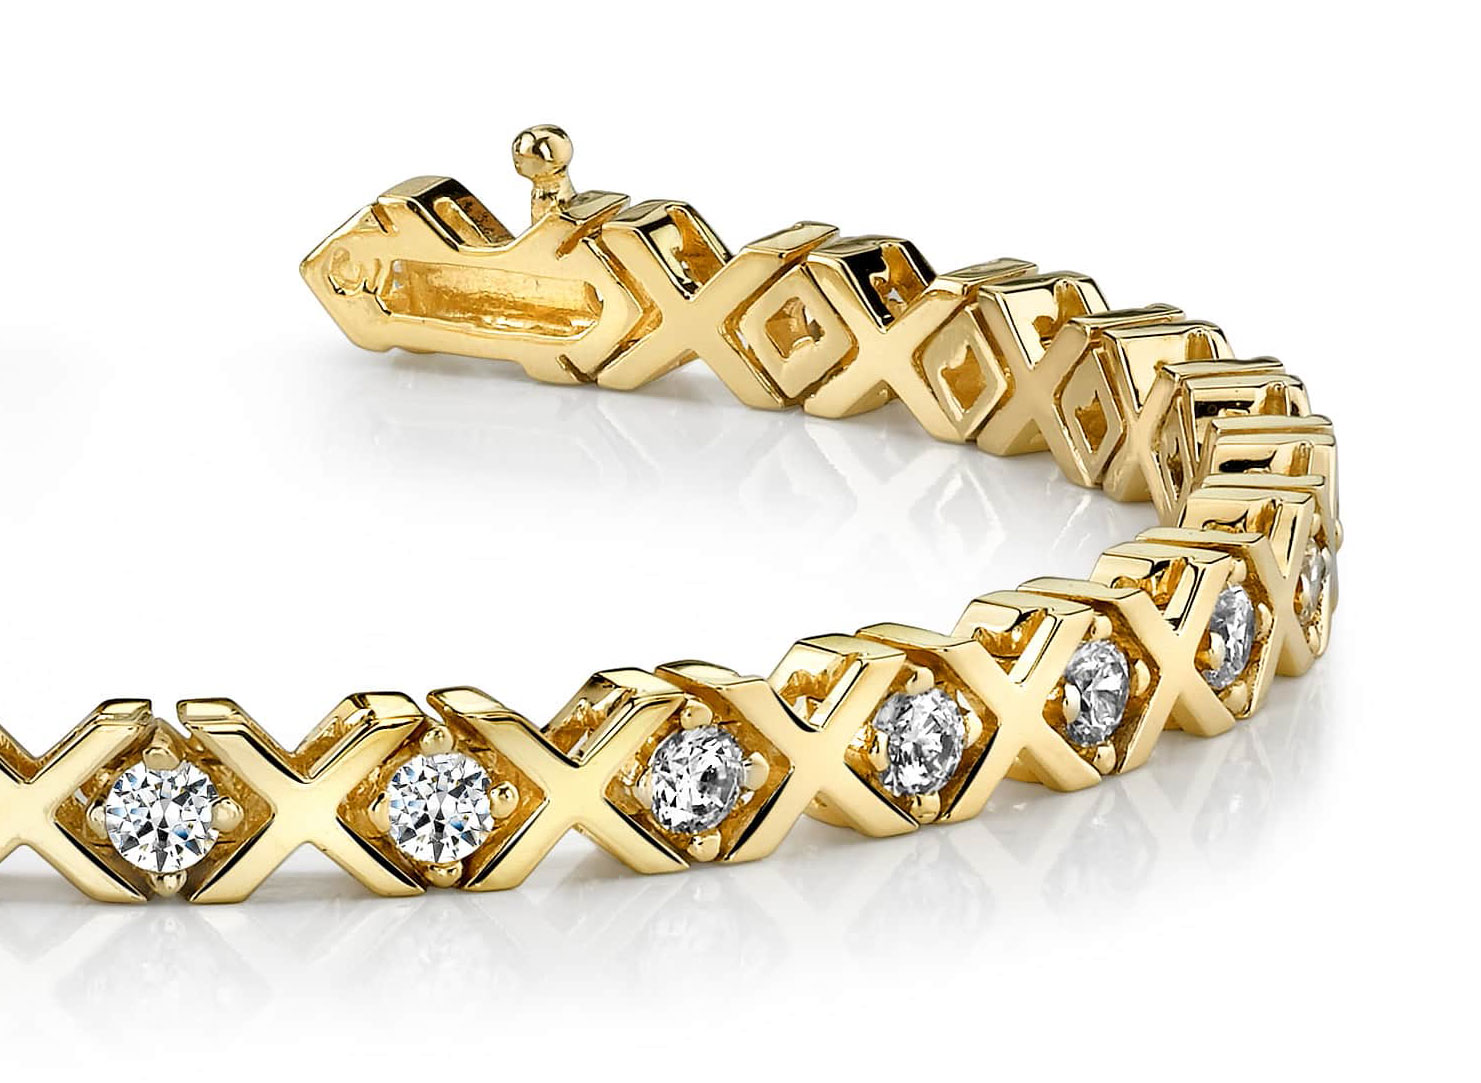 2.95 Carat Lab Grown Diamond Round Stylish Bracelet 18k Yellow Gold  Bracelets For Men & Women - Ajretail Your One-Stop Destination for Lab  Grown Diamonds, Gemstones, and Jewelry Wholesale and Export